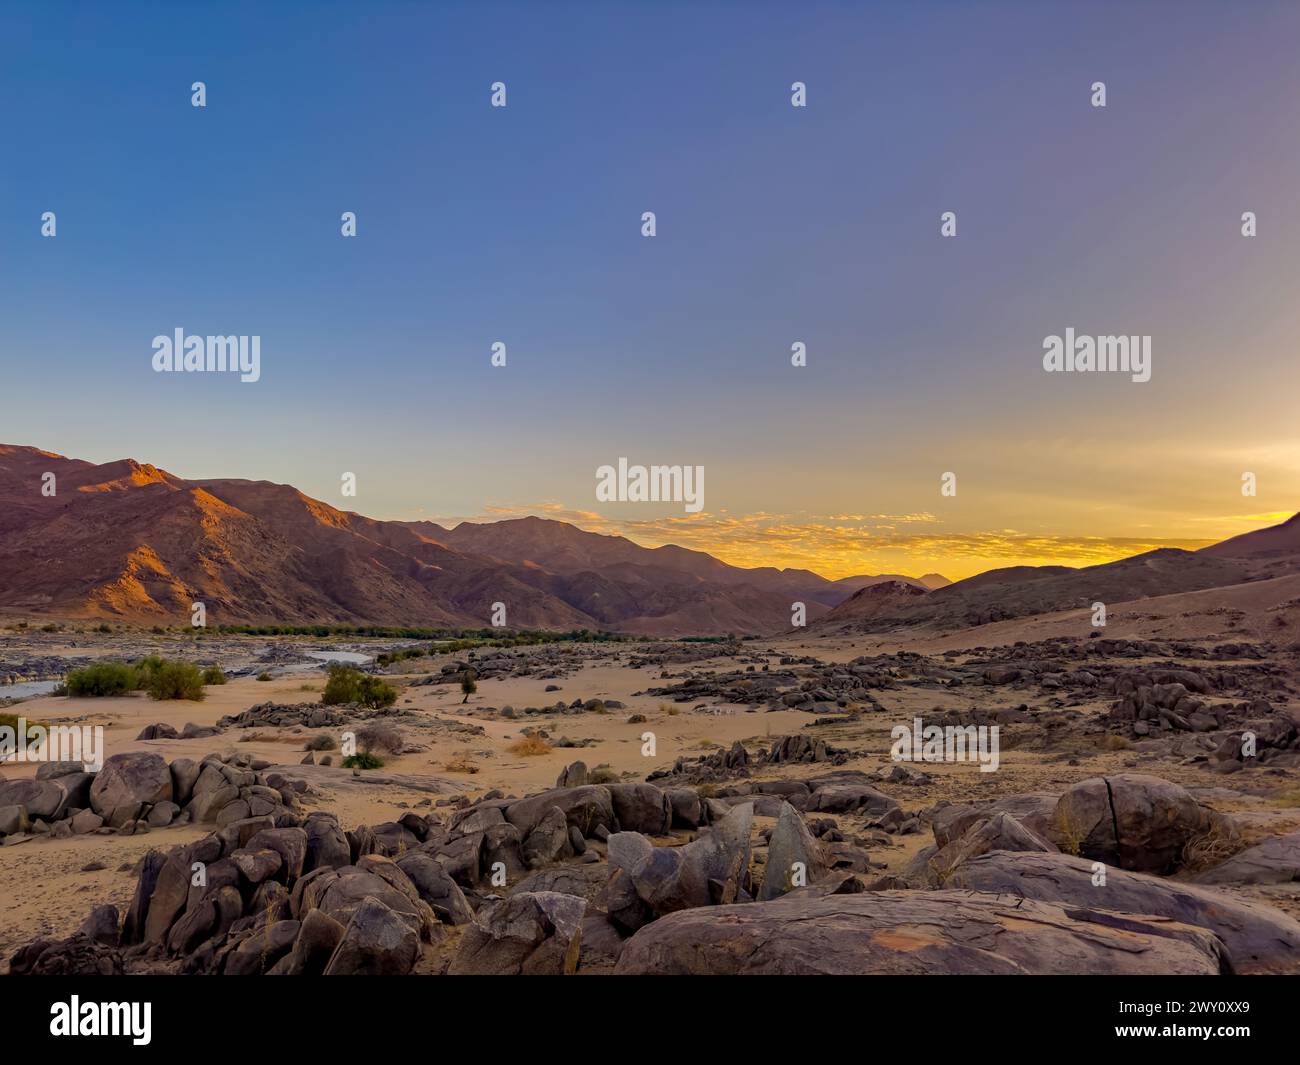 Sunrise at Tatasberg Camp Site on the Orange River in the Richtersveld National Park, arid area of South Africa Stock Photo